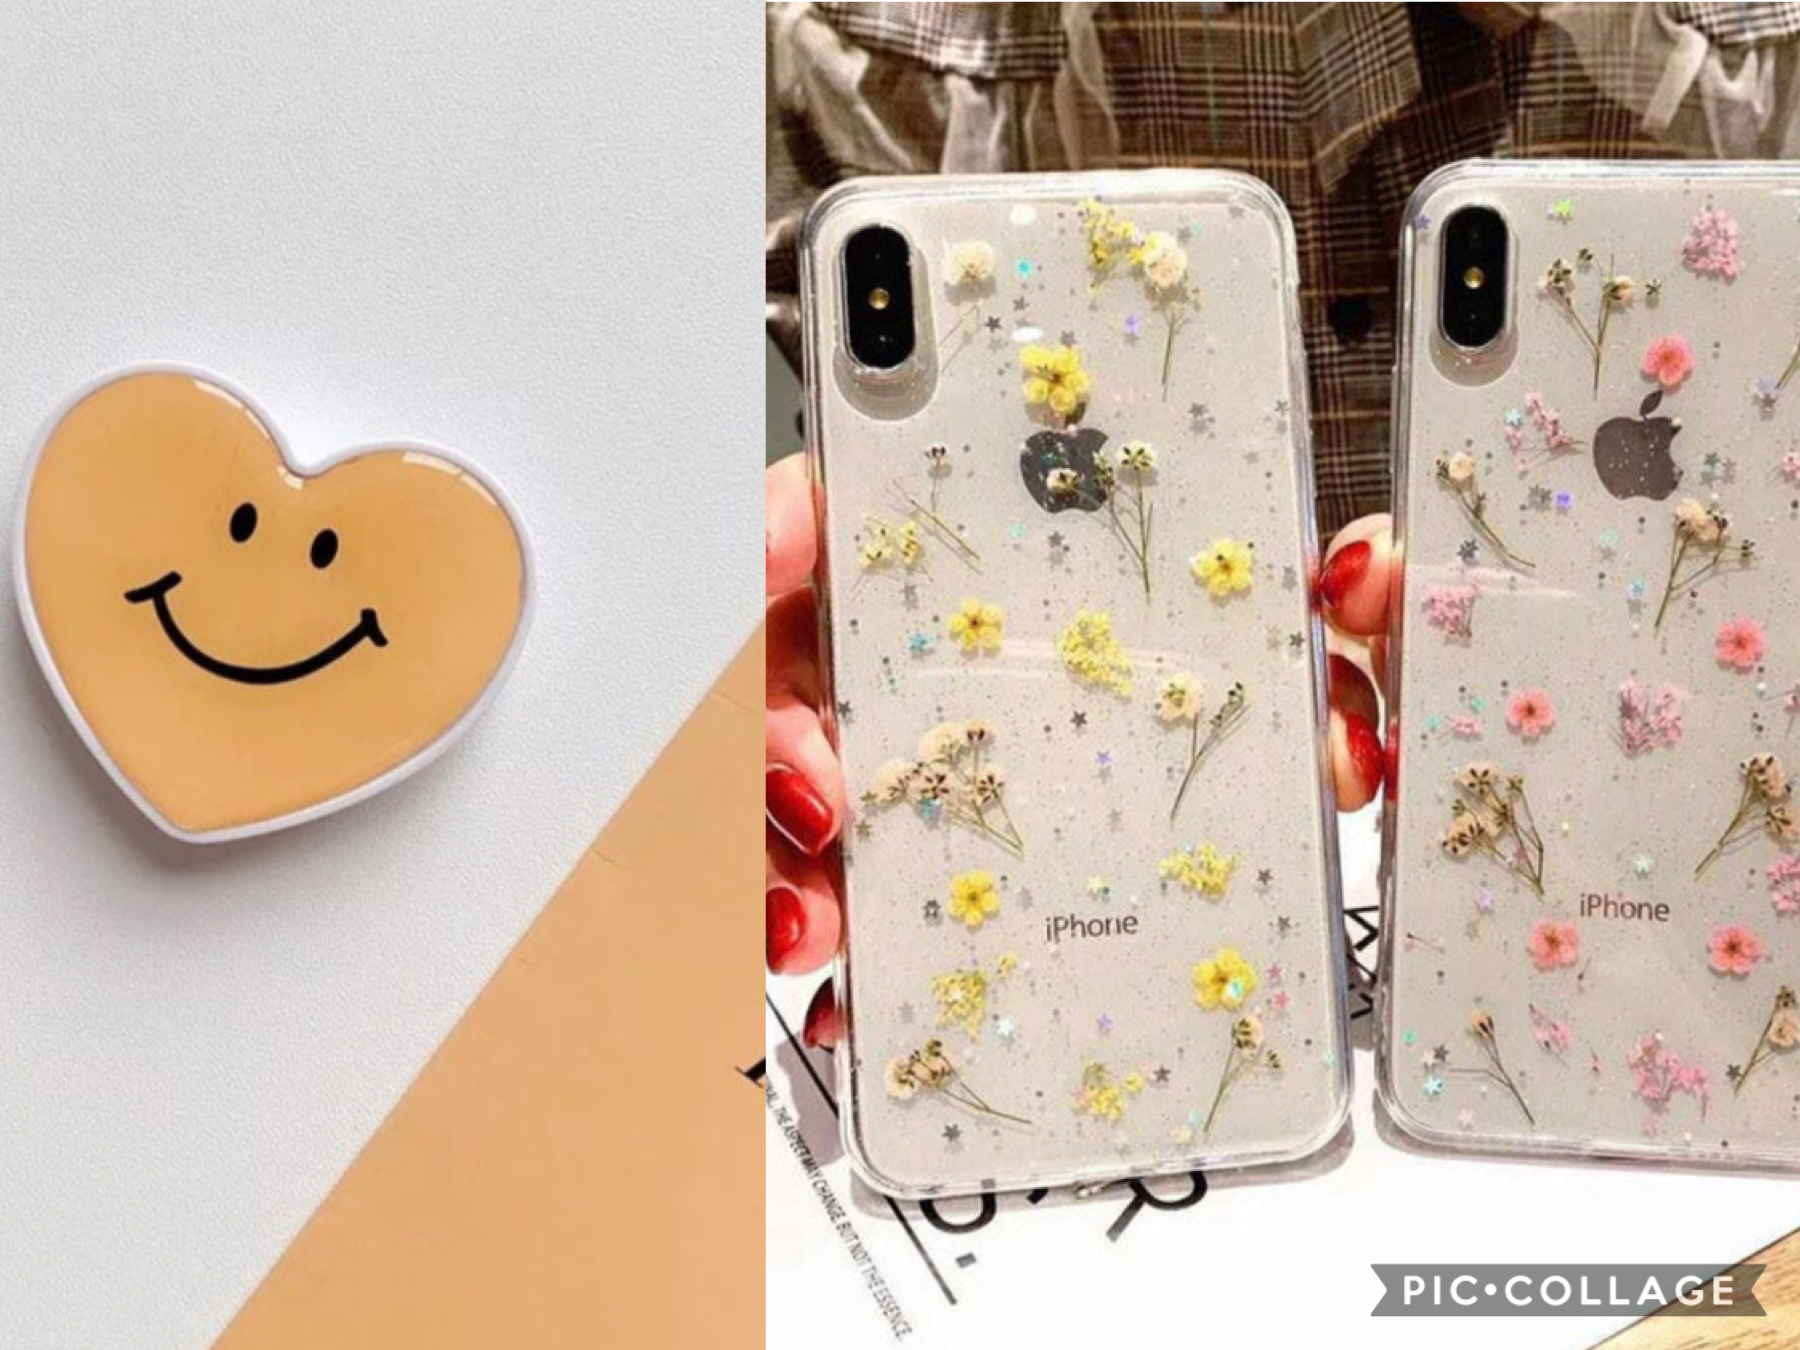 I saw this pop socket + phone case and I’m in LOVE like pls I want this 😣🤚🏼it’s like $20 in total so hopefully I can order them if I convince my mom :))) my cousin bought LED lights for my family for no reason n we put them up and they look pretty cool ng